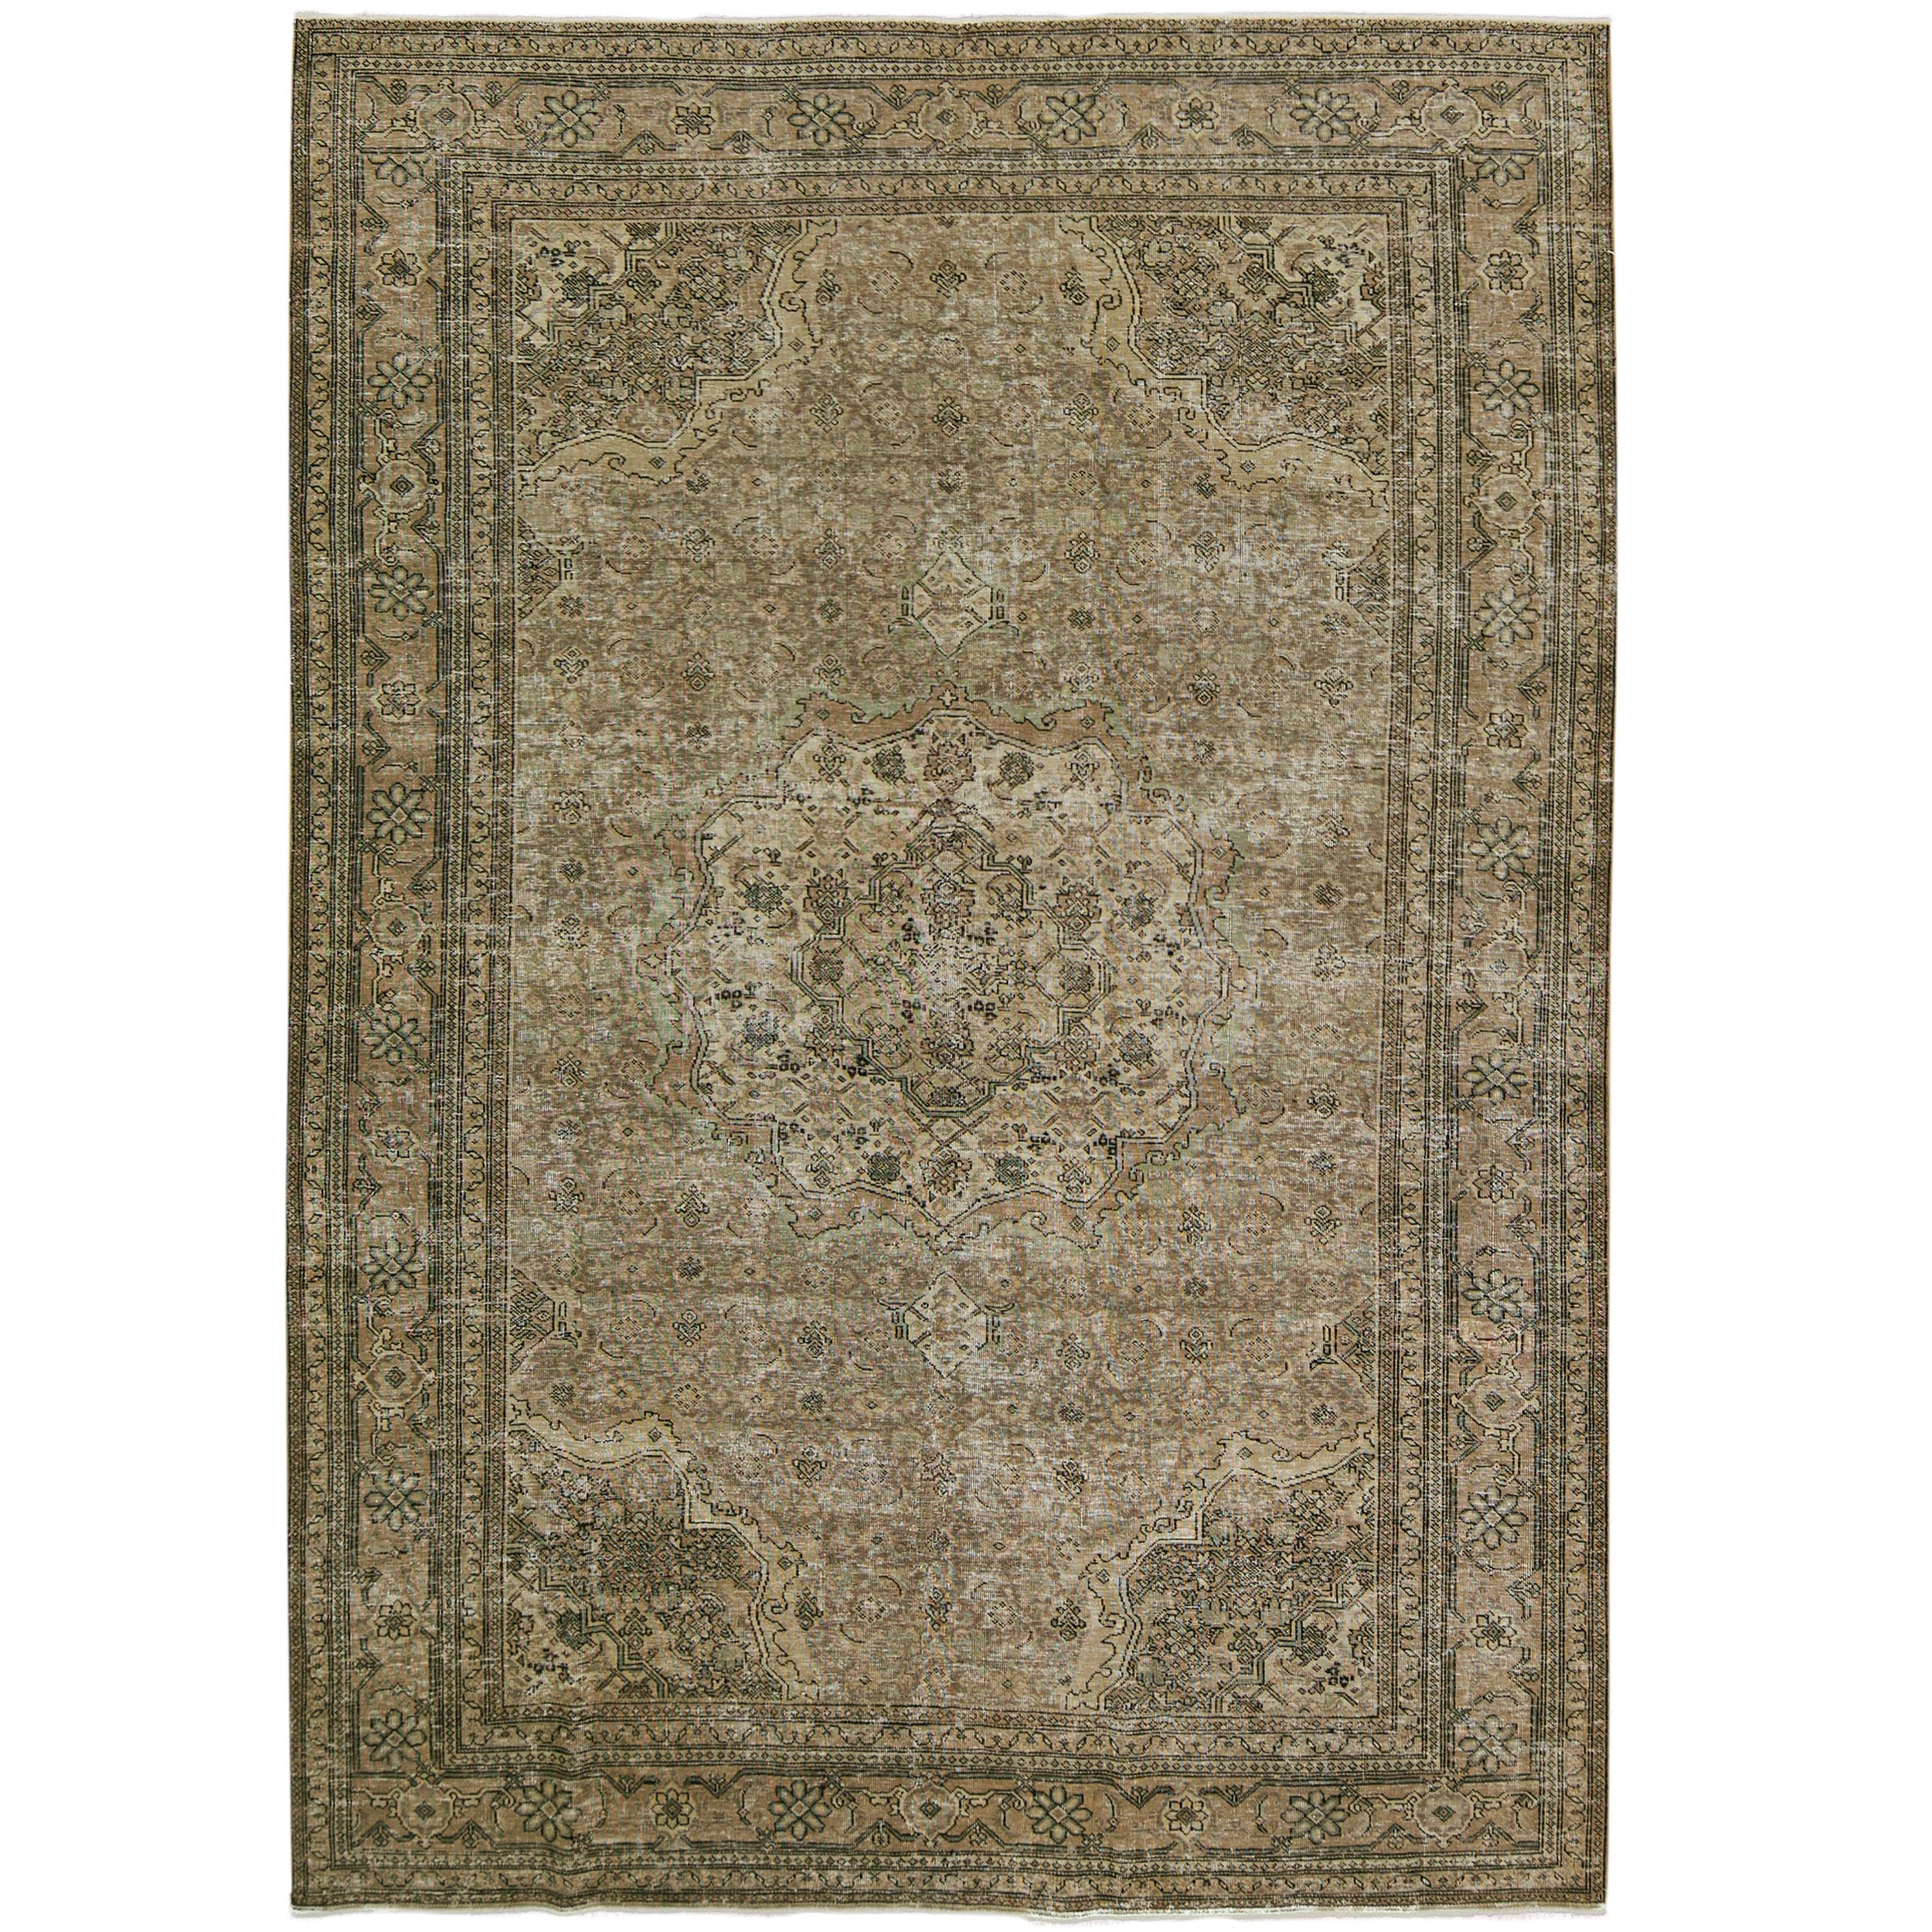 Shoshanna - Elegance Woven with Tradition | Kuden Rugs